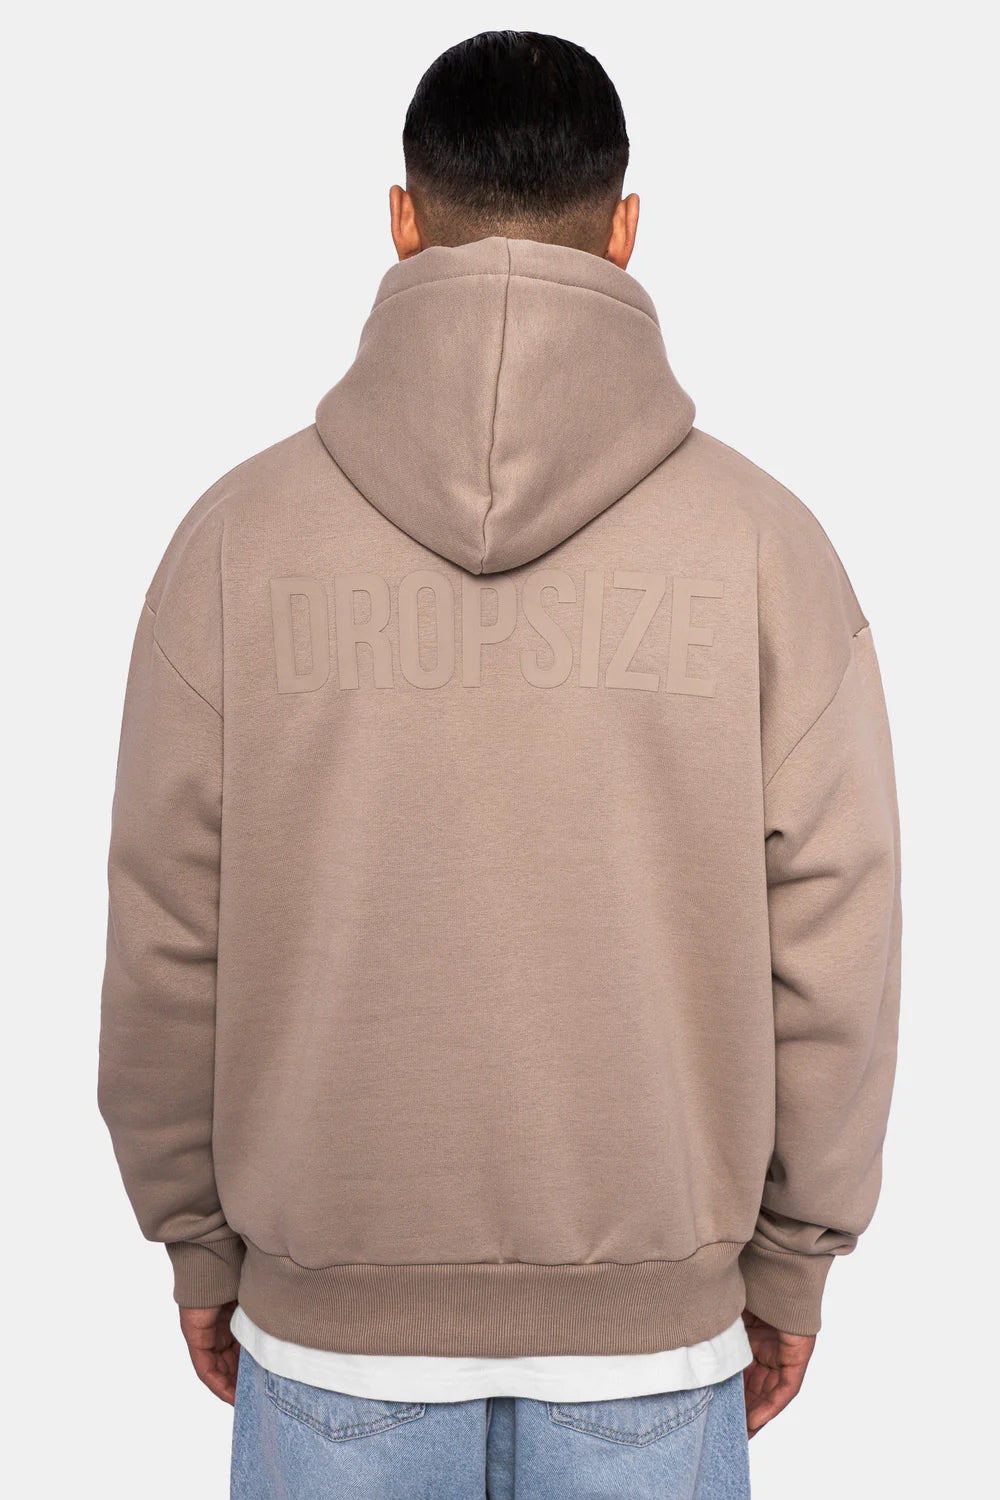 Dropsize Heavy Oversize HD Print Hoodie Simply Taupe